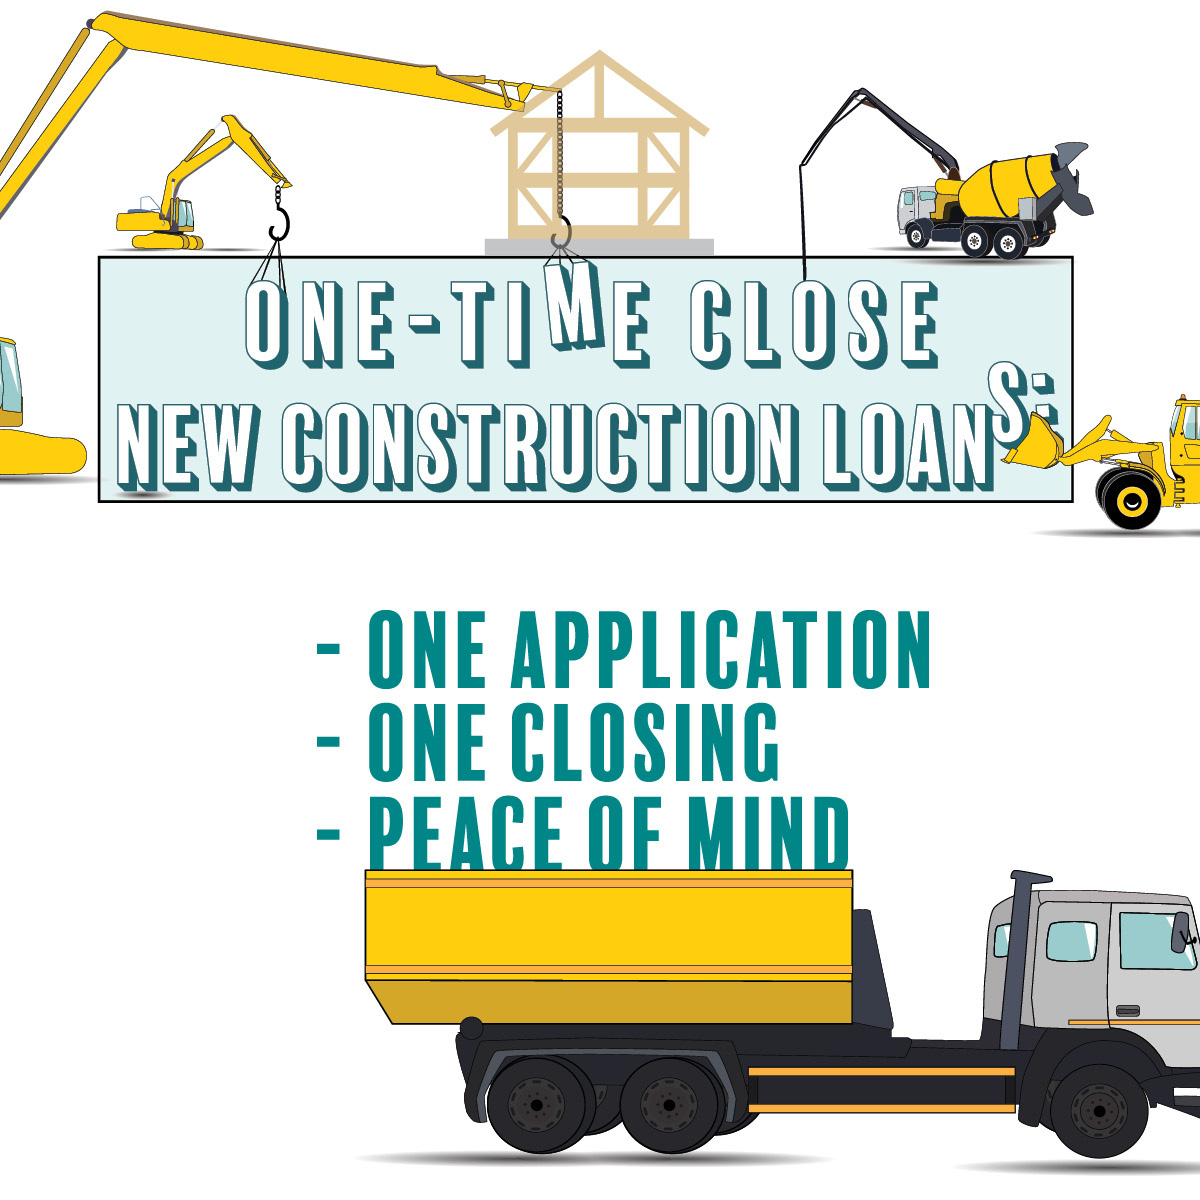 Building your dream home? Let's simplify the process with a One-Time Close New Construction loan. One application, one closing, peace of mind. Call me today!